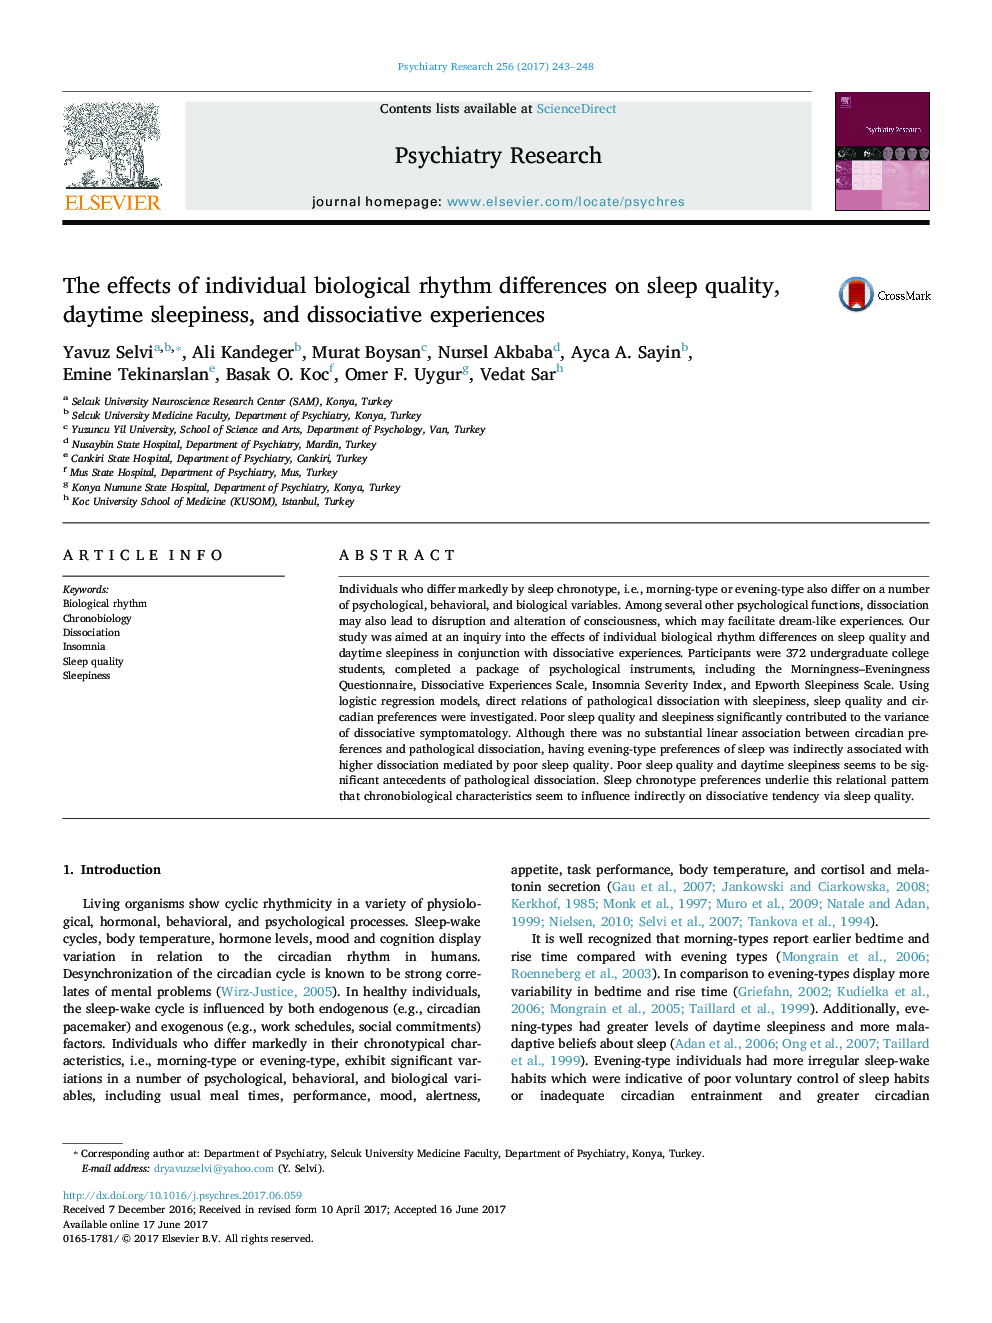 The effects of individual biological rhythm differences on sleep quality, daytime sleepiness, and dissociative experiences